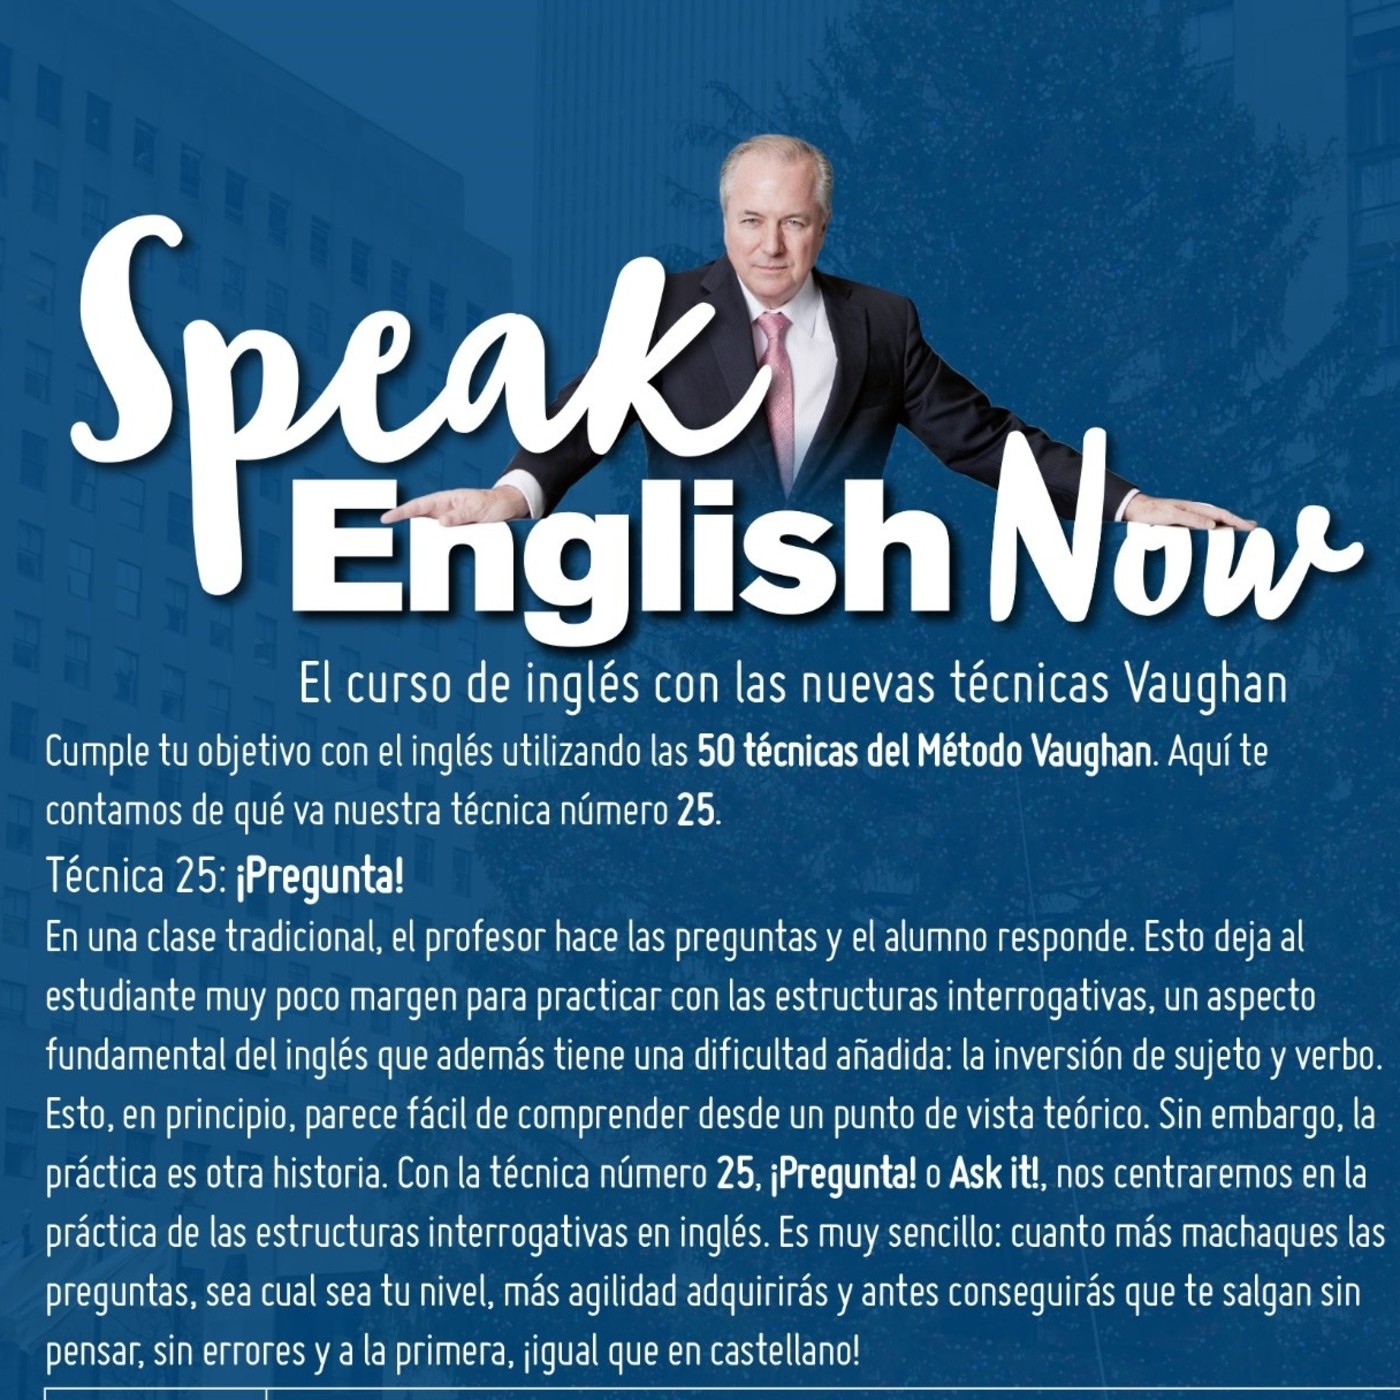 Speak English Now by Vaughan Libro 21